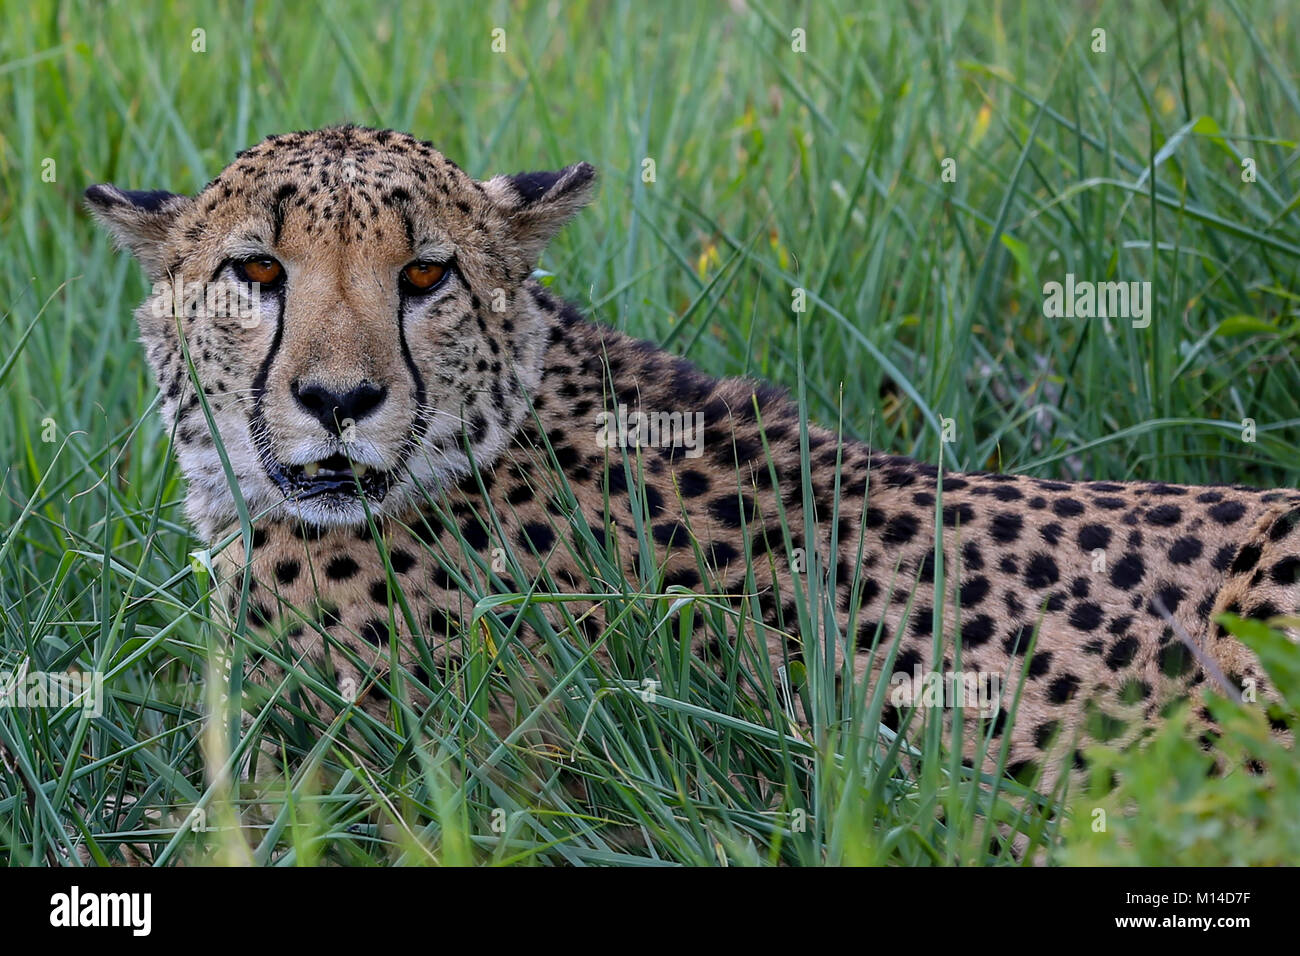 African Cheetah laying in long grass looking directly at camera with mouth slightly open Stock Photo